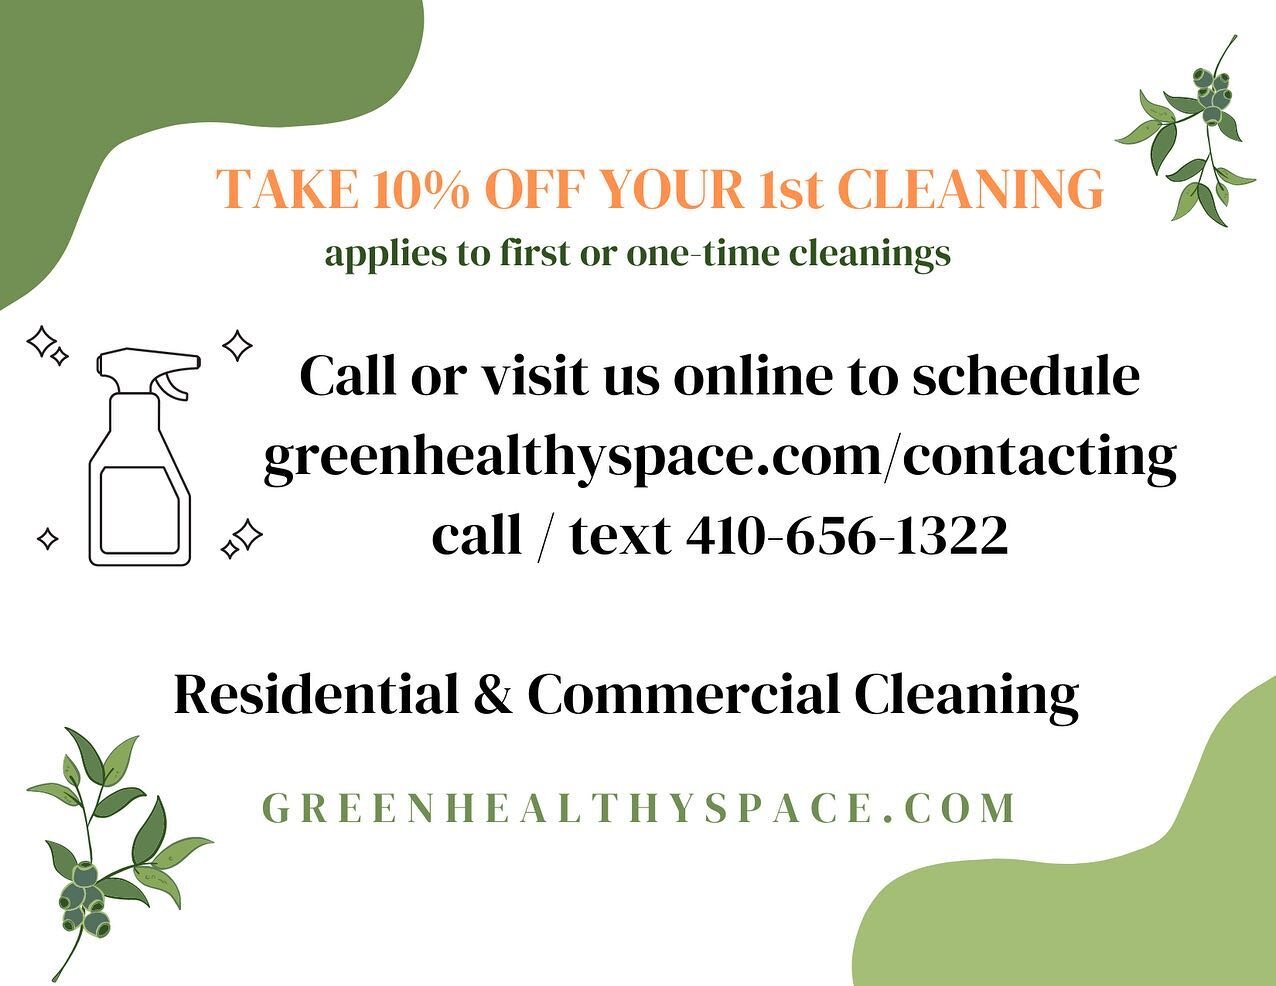 Need help cleaning this spring? Book a cleaning session with us! Visit the link in bio to learn more 🧹#greencleaning #ecofriendly #earth #pittsburgh #greenpittsburgh #springcleaning #cleaningpromo #deepcleaning #cleaning #thecleaninglady